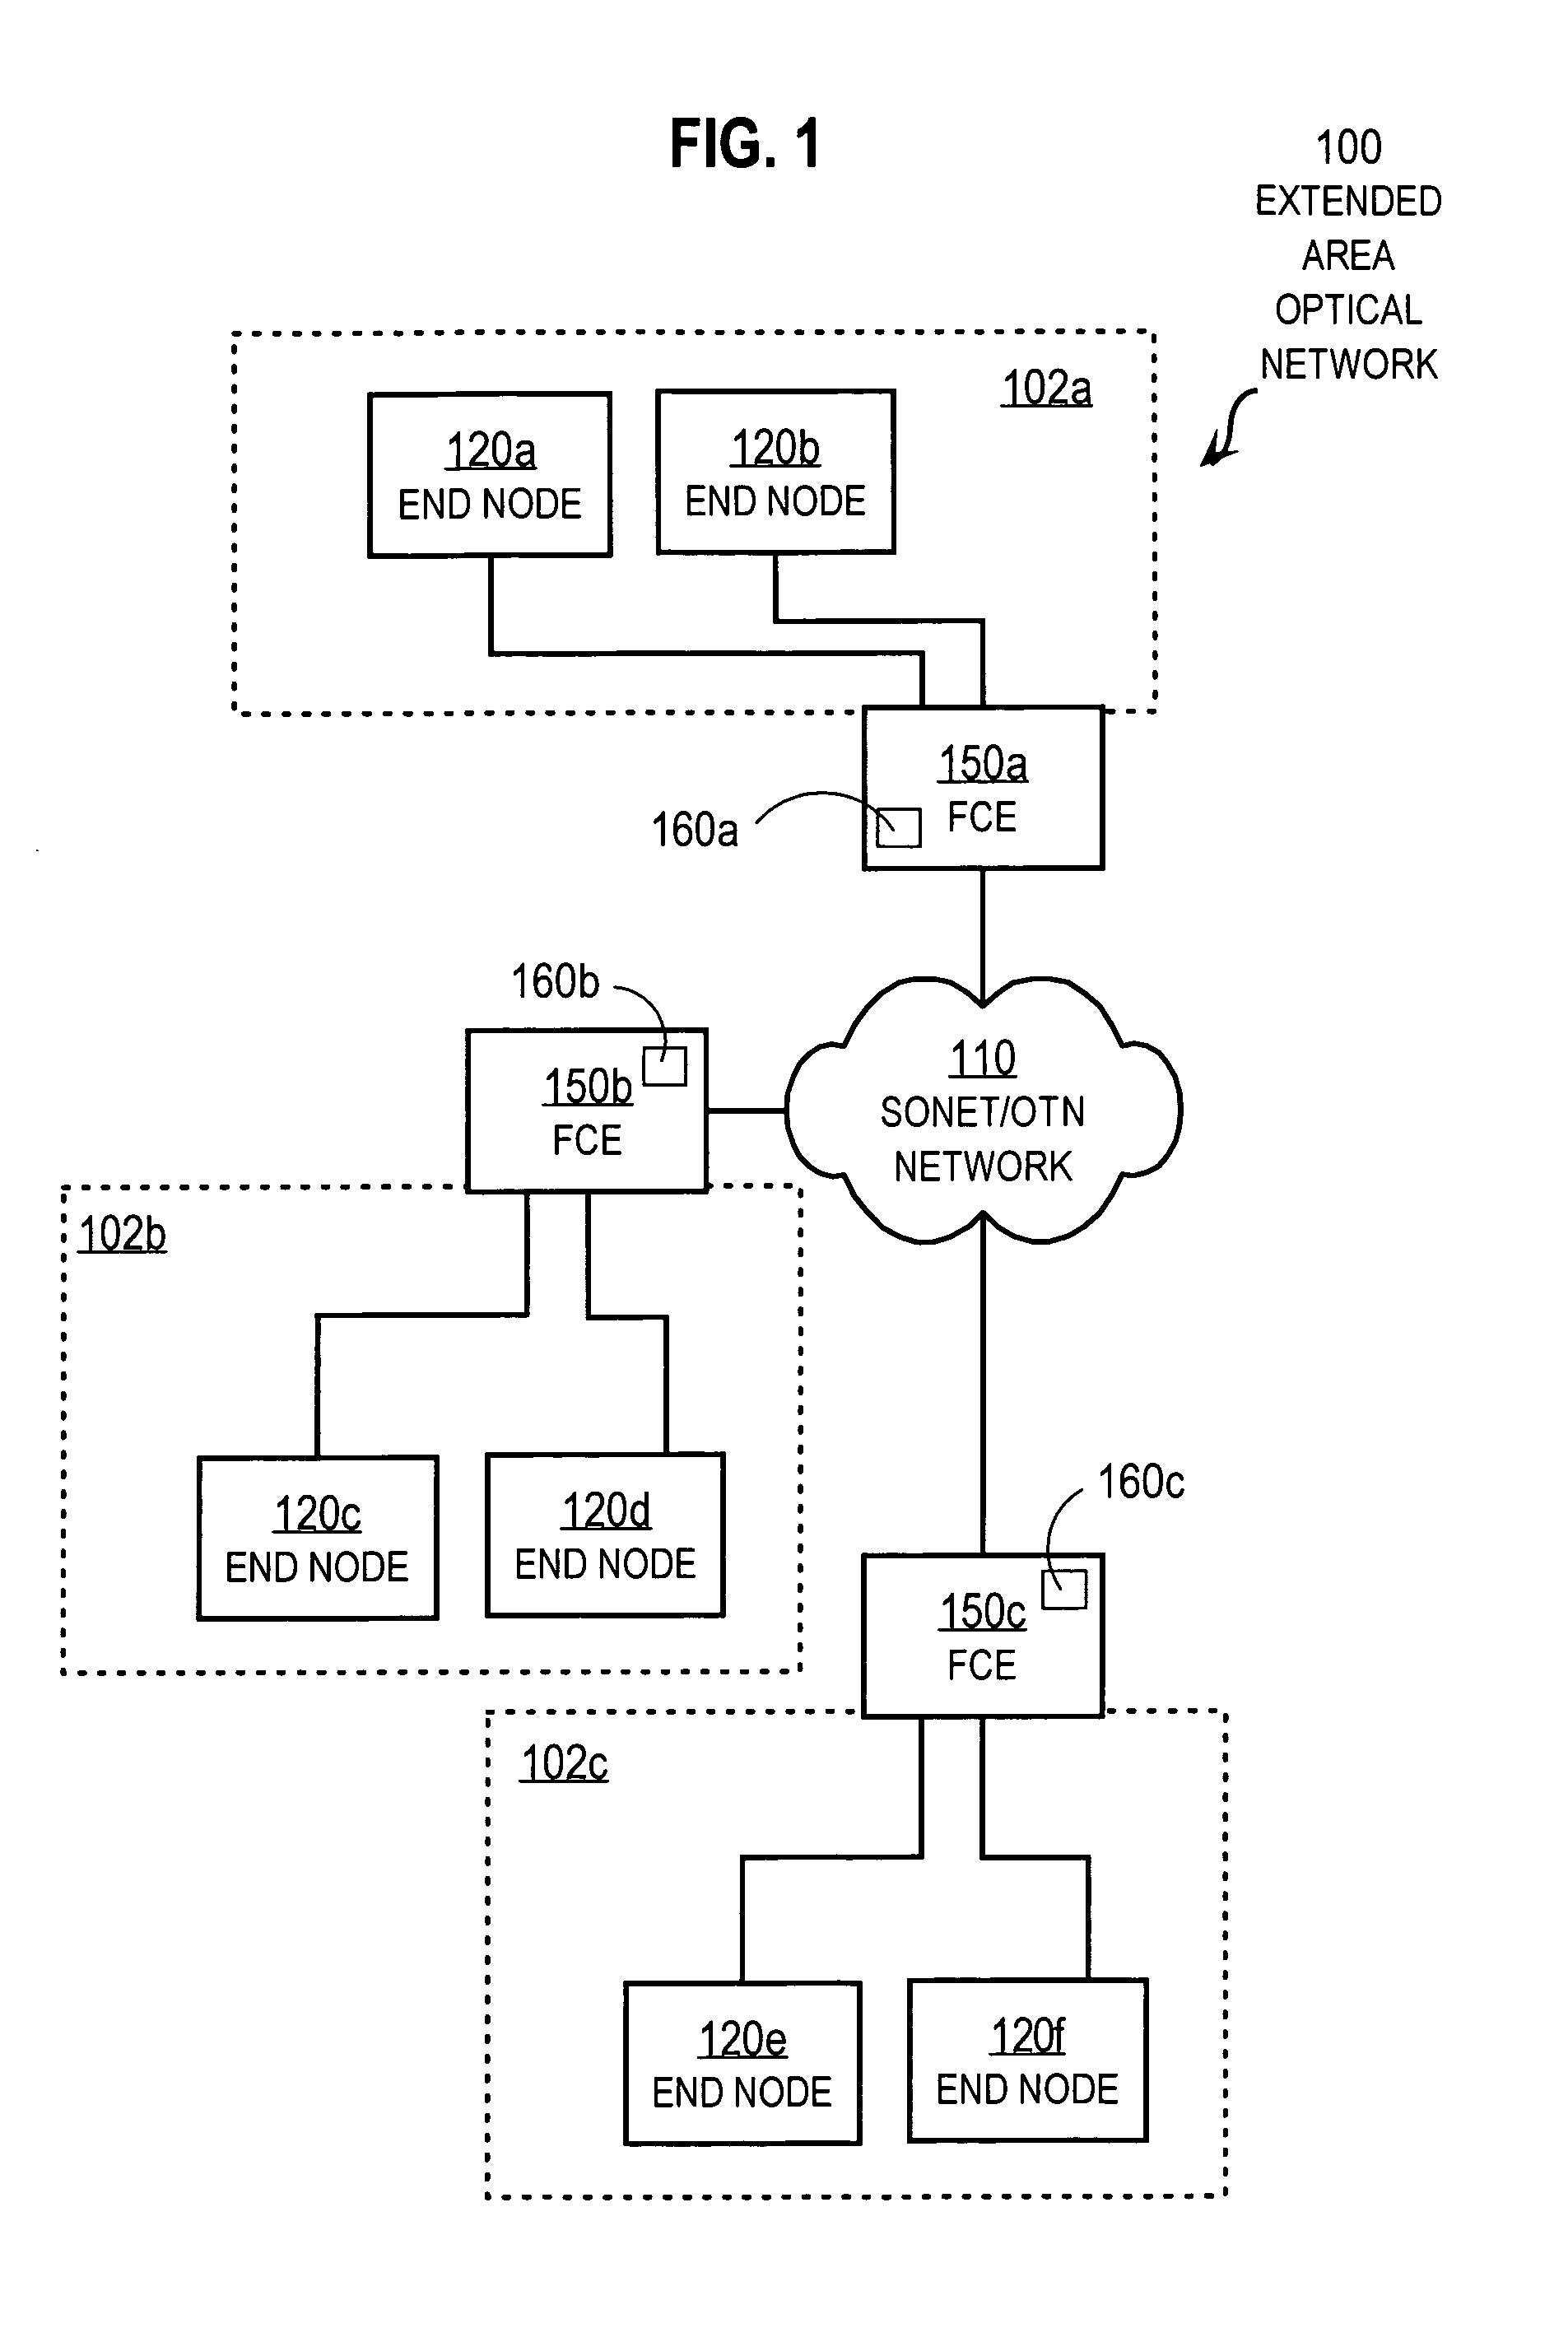 Techniques for ensuring synchronized processing at remote fiber channel and fiber connectivity networks